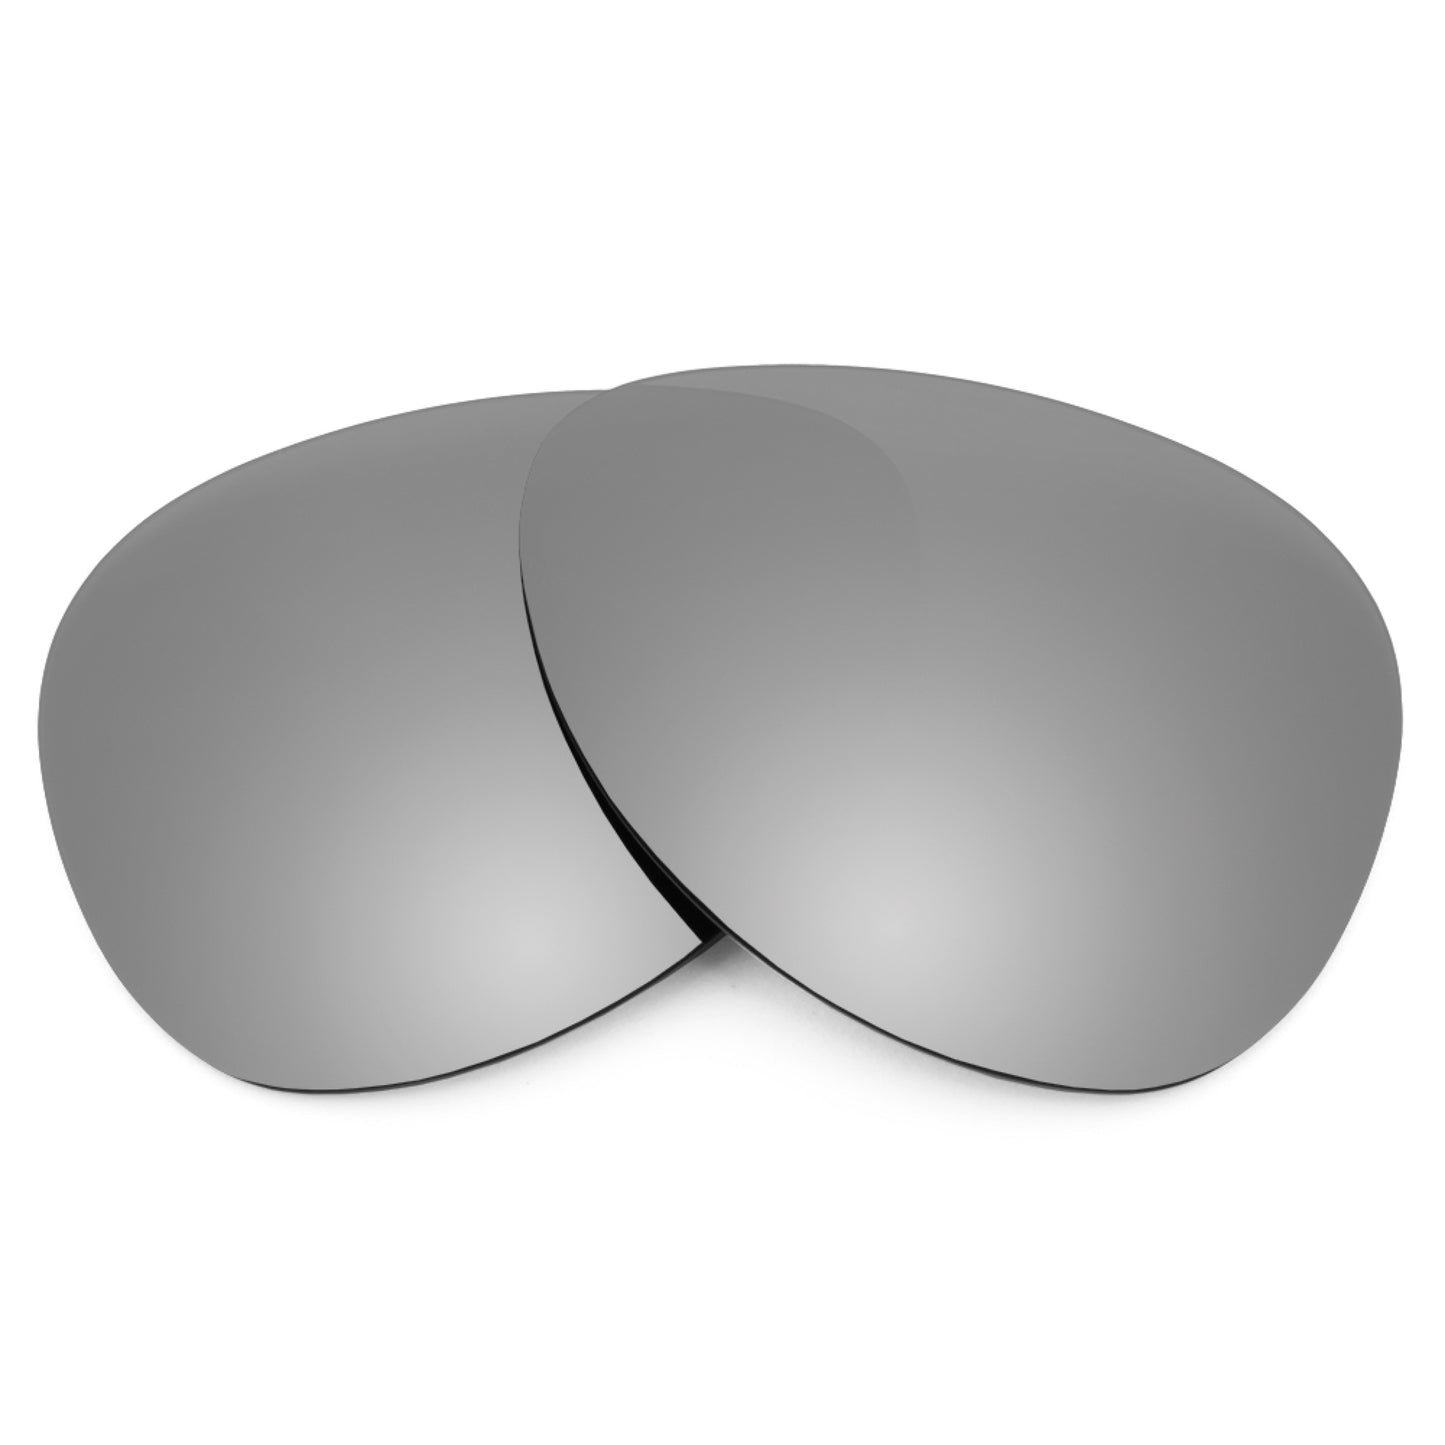 Revant replacement lenses for Ray-Ban Folding Aviator RB3479 55mm Polarized Titanium